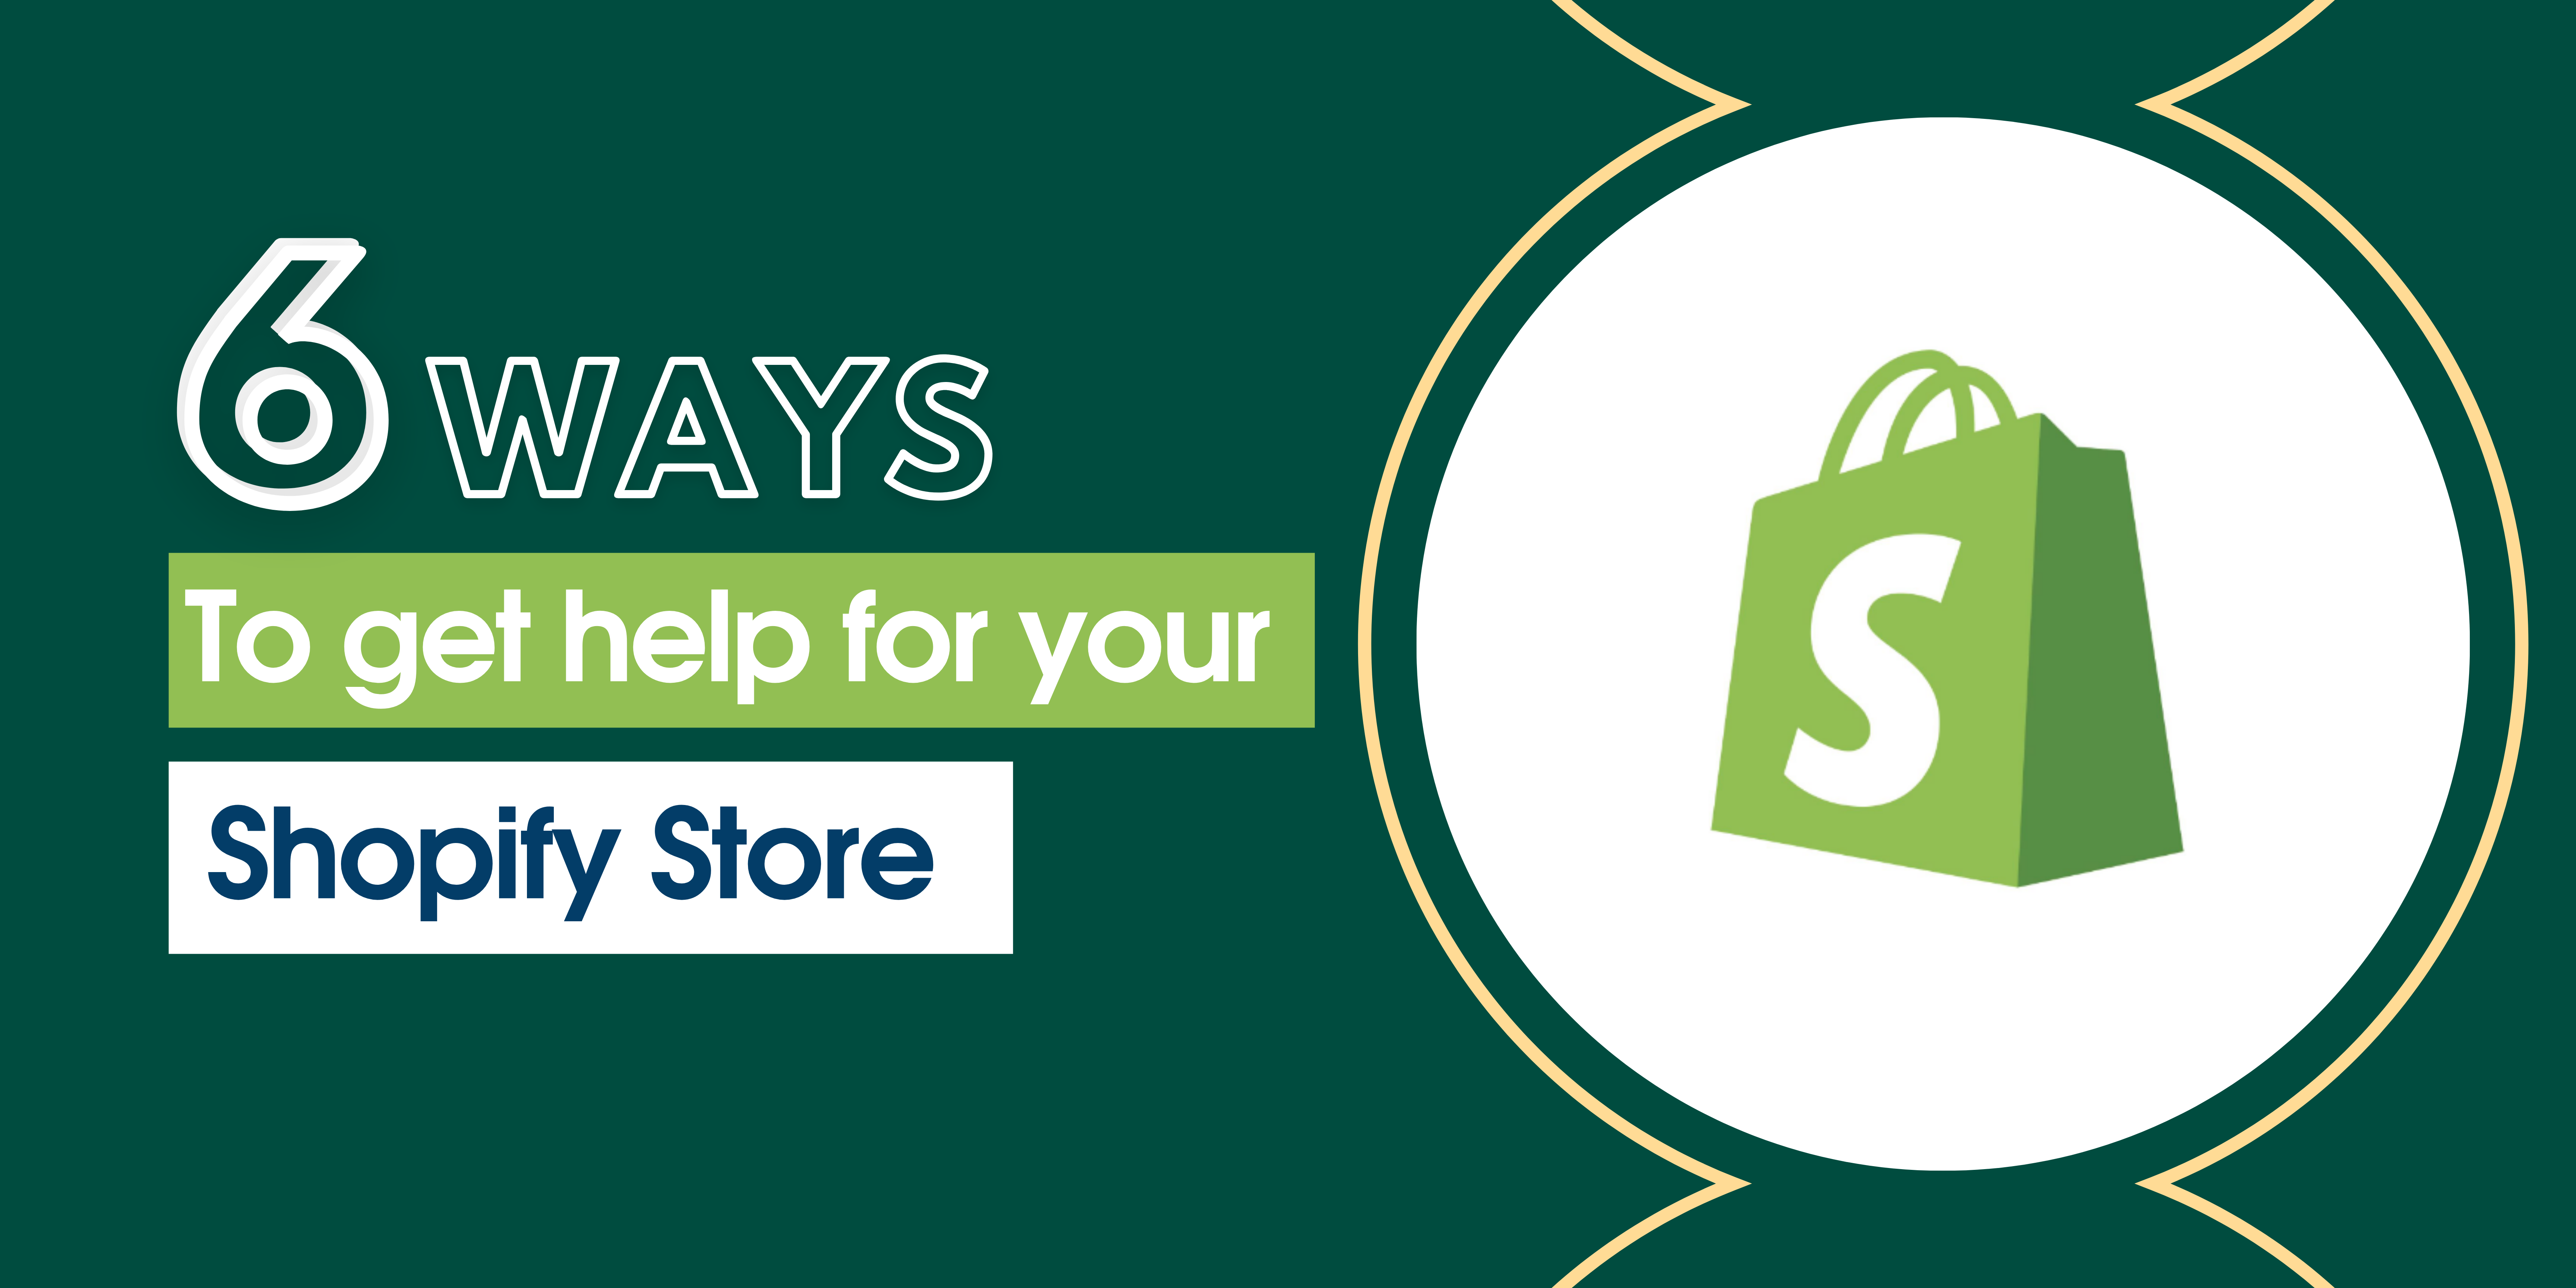 6-ways-to-get-help-for-your-shopify-store